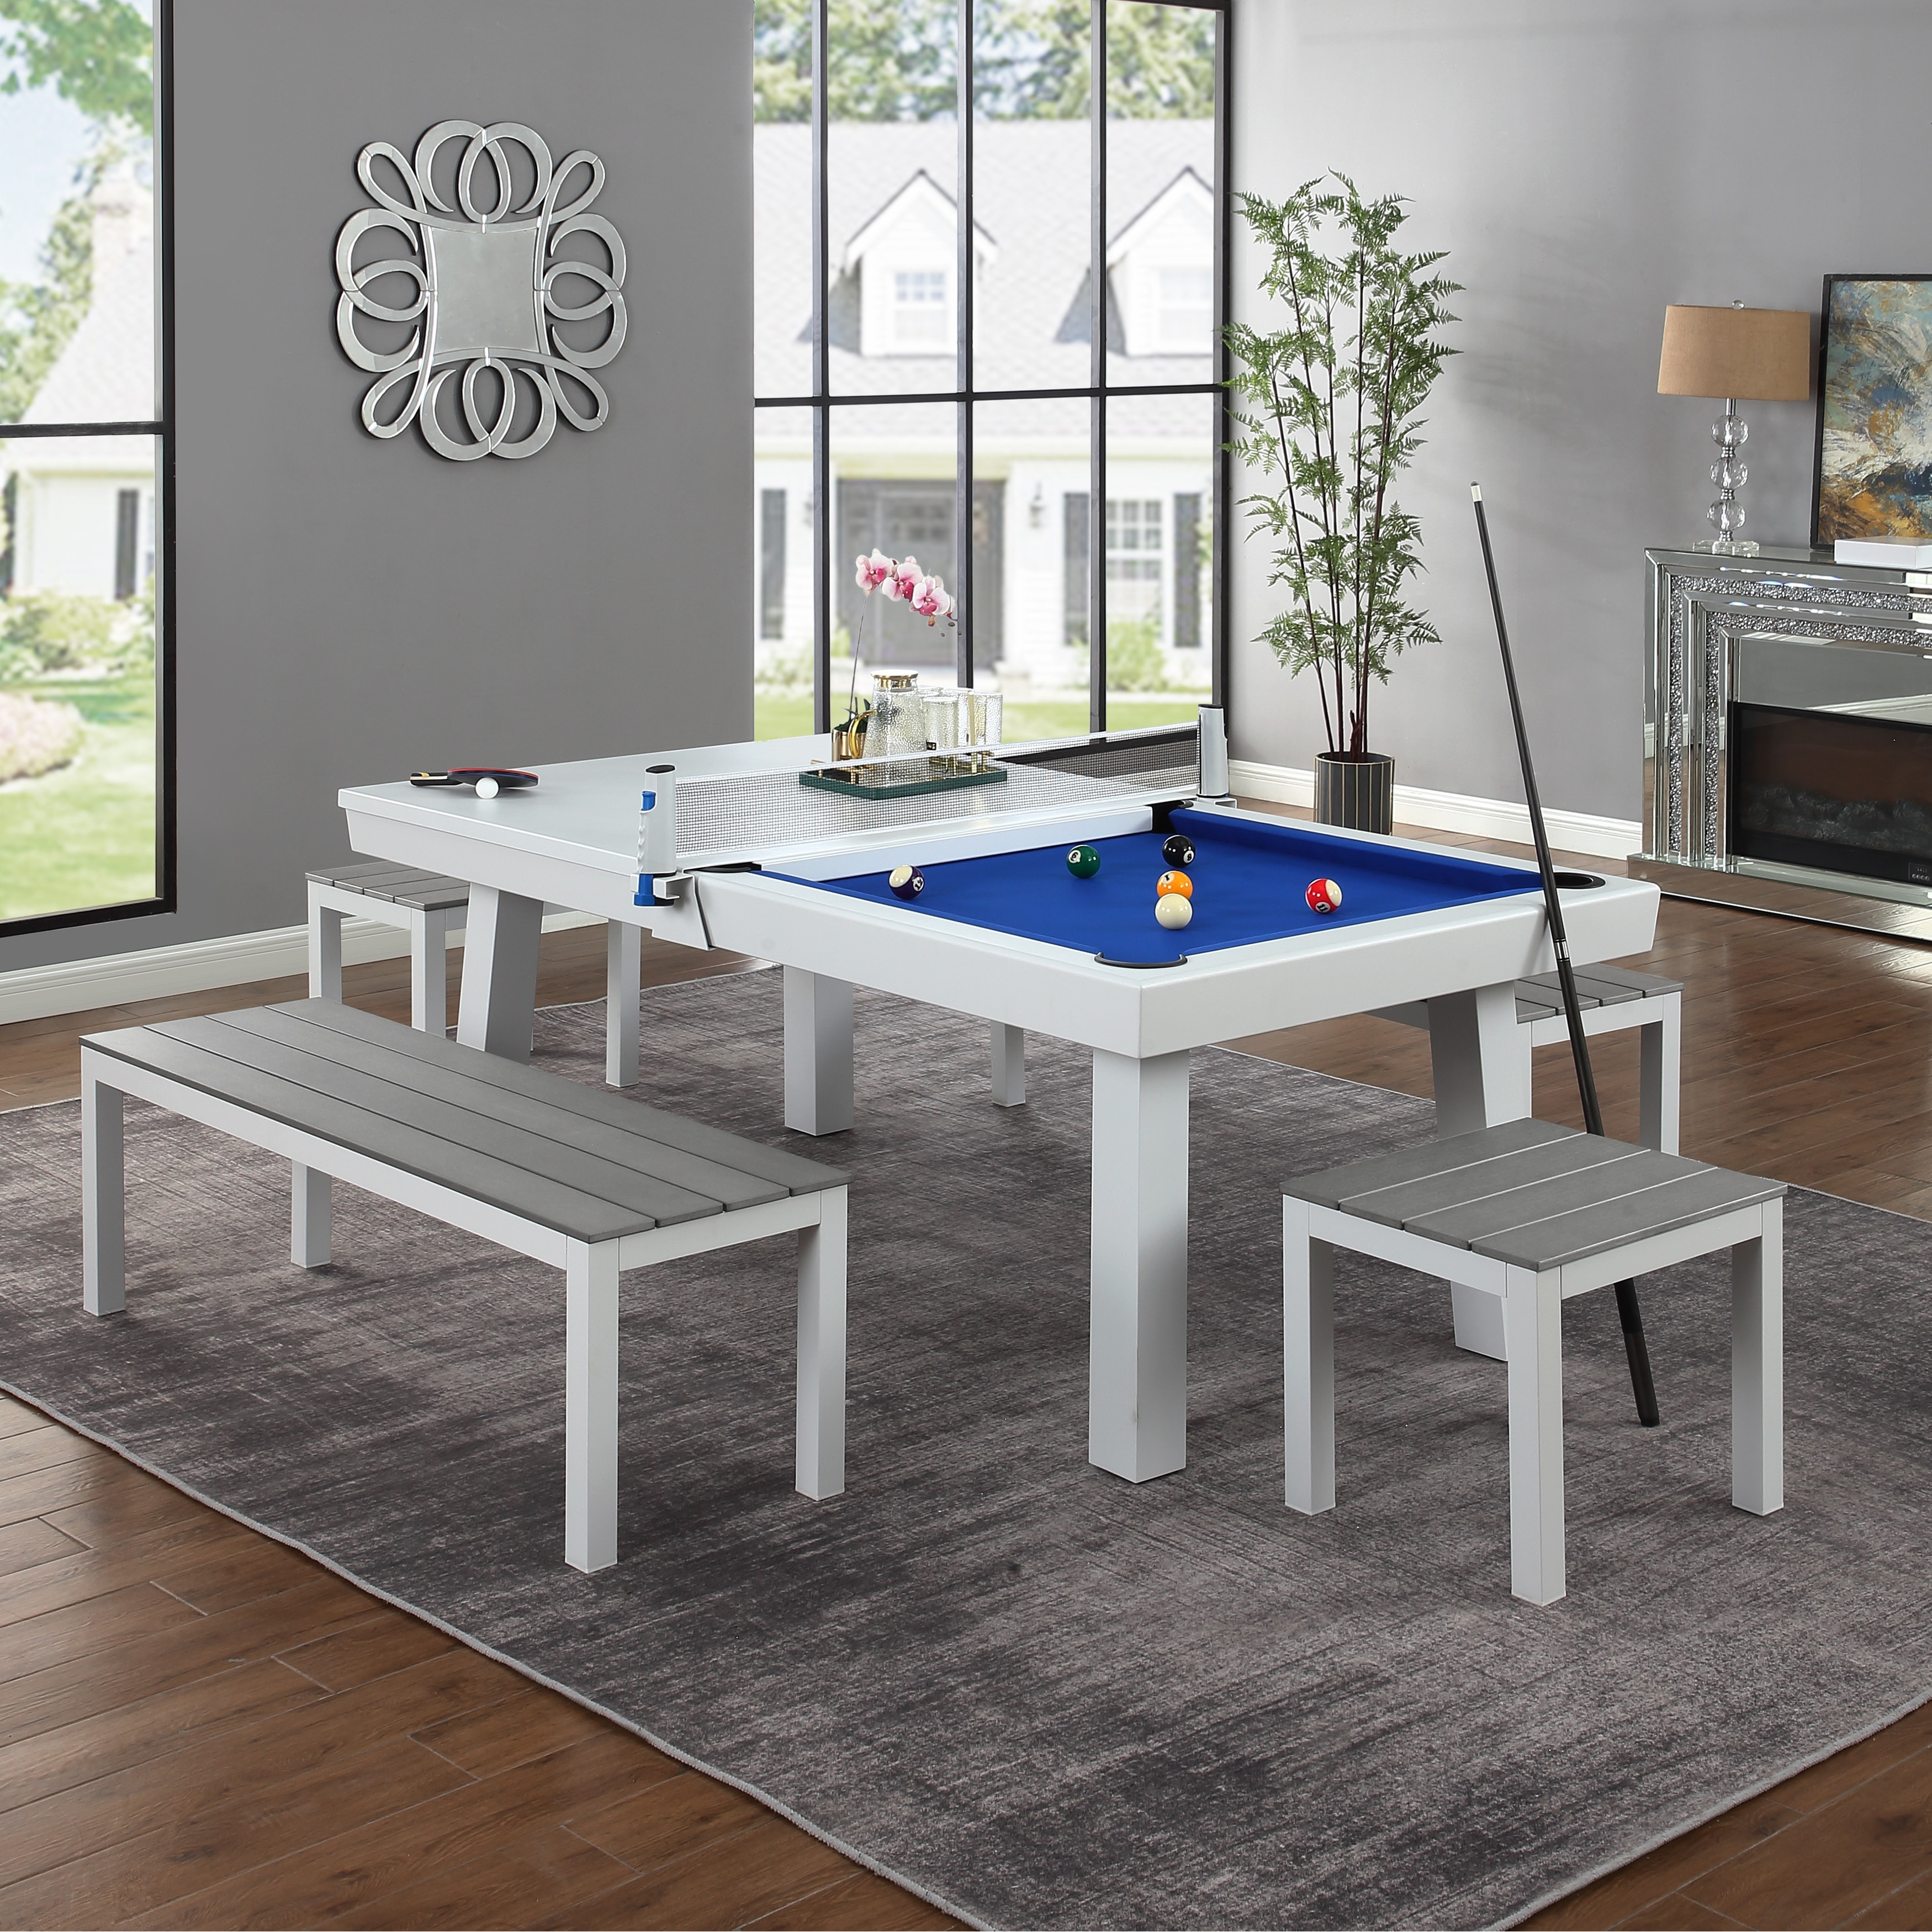 Newport Outdoor Patio 7ft Slate Pool Table 6-seater Dining Set With 4 Benches and Accessories  White Finish